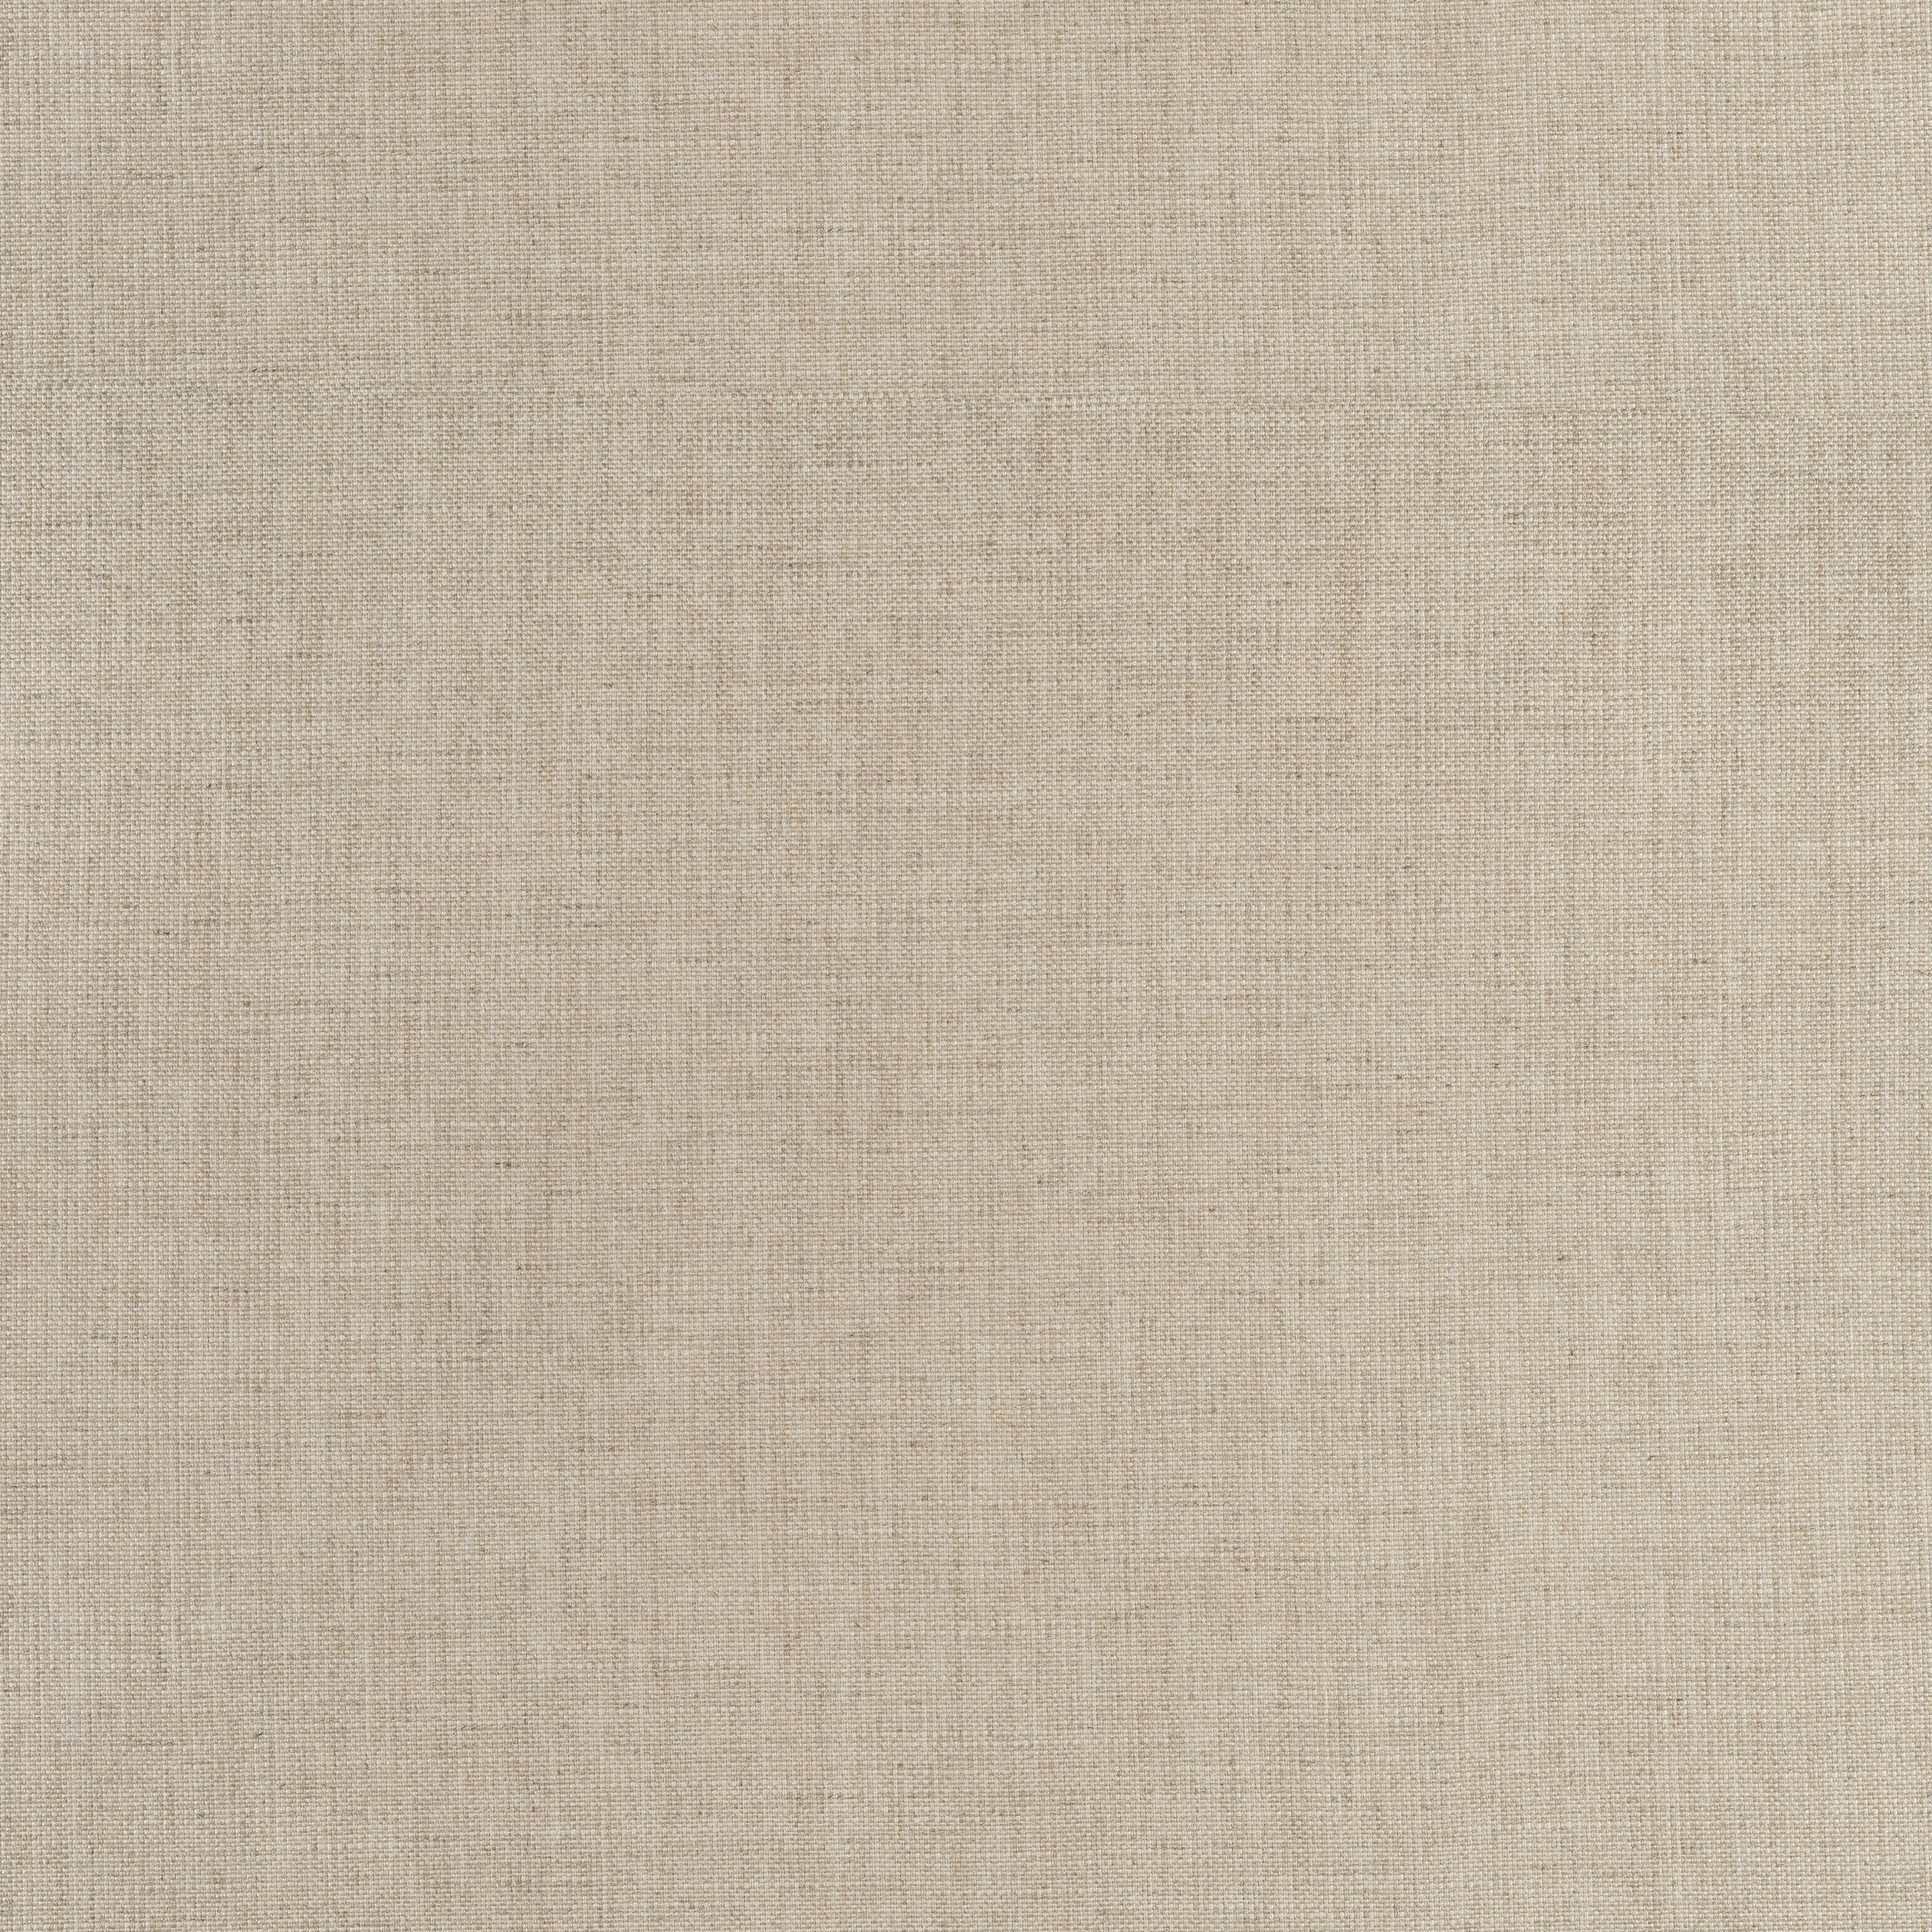 Ambient fabric in jute color - pattern number W75202 - by Thibaut in the Elements collection